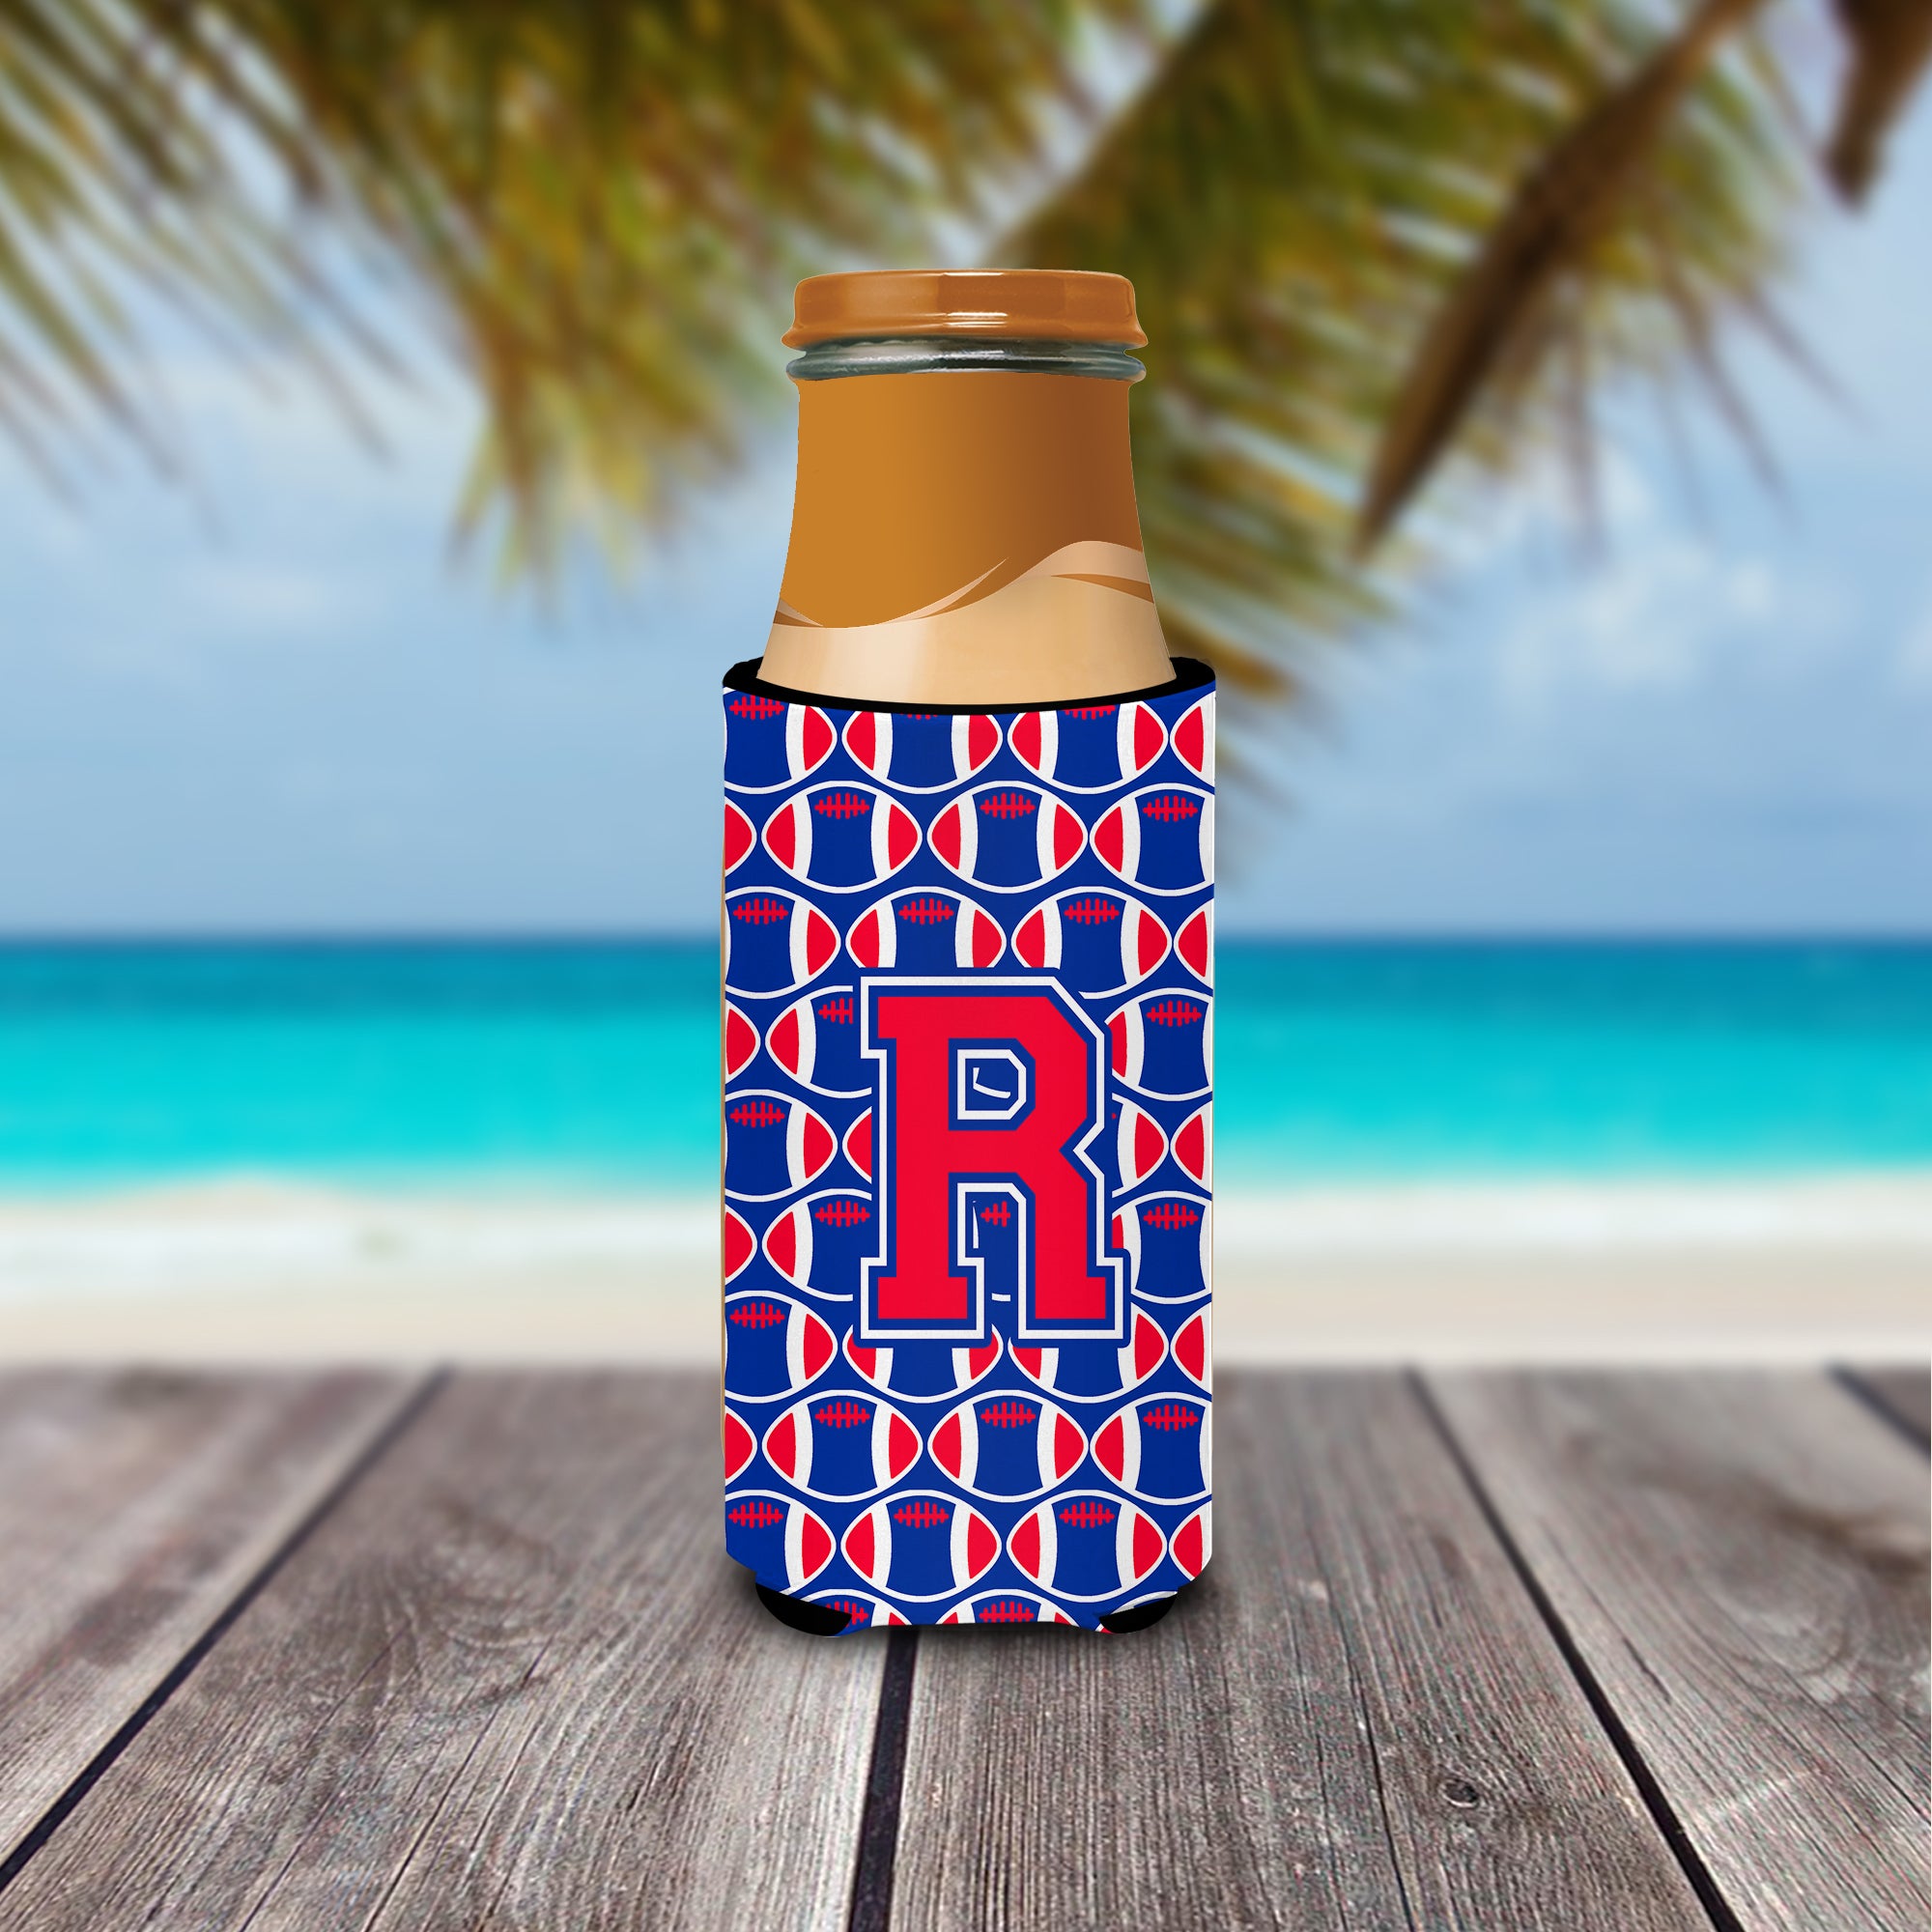 Letter R Football Crimson and Yale Blue Ultra Beverage Insulators for slim cans CJ1076-RMUK